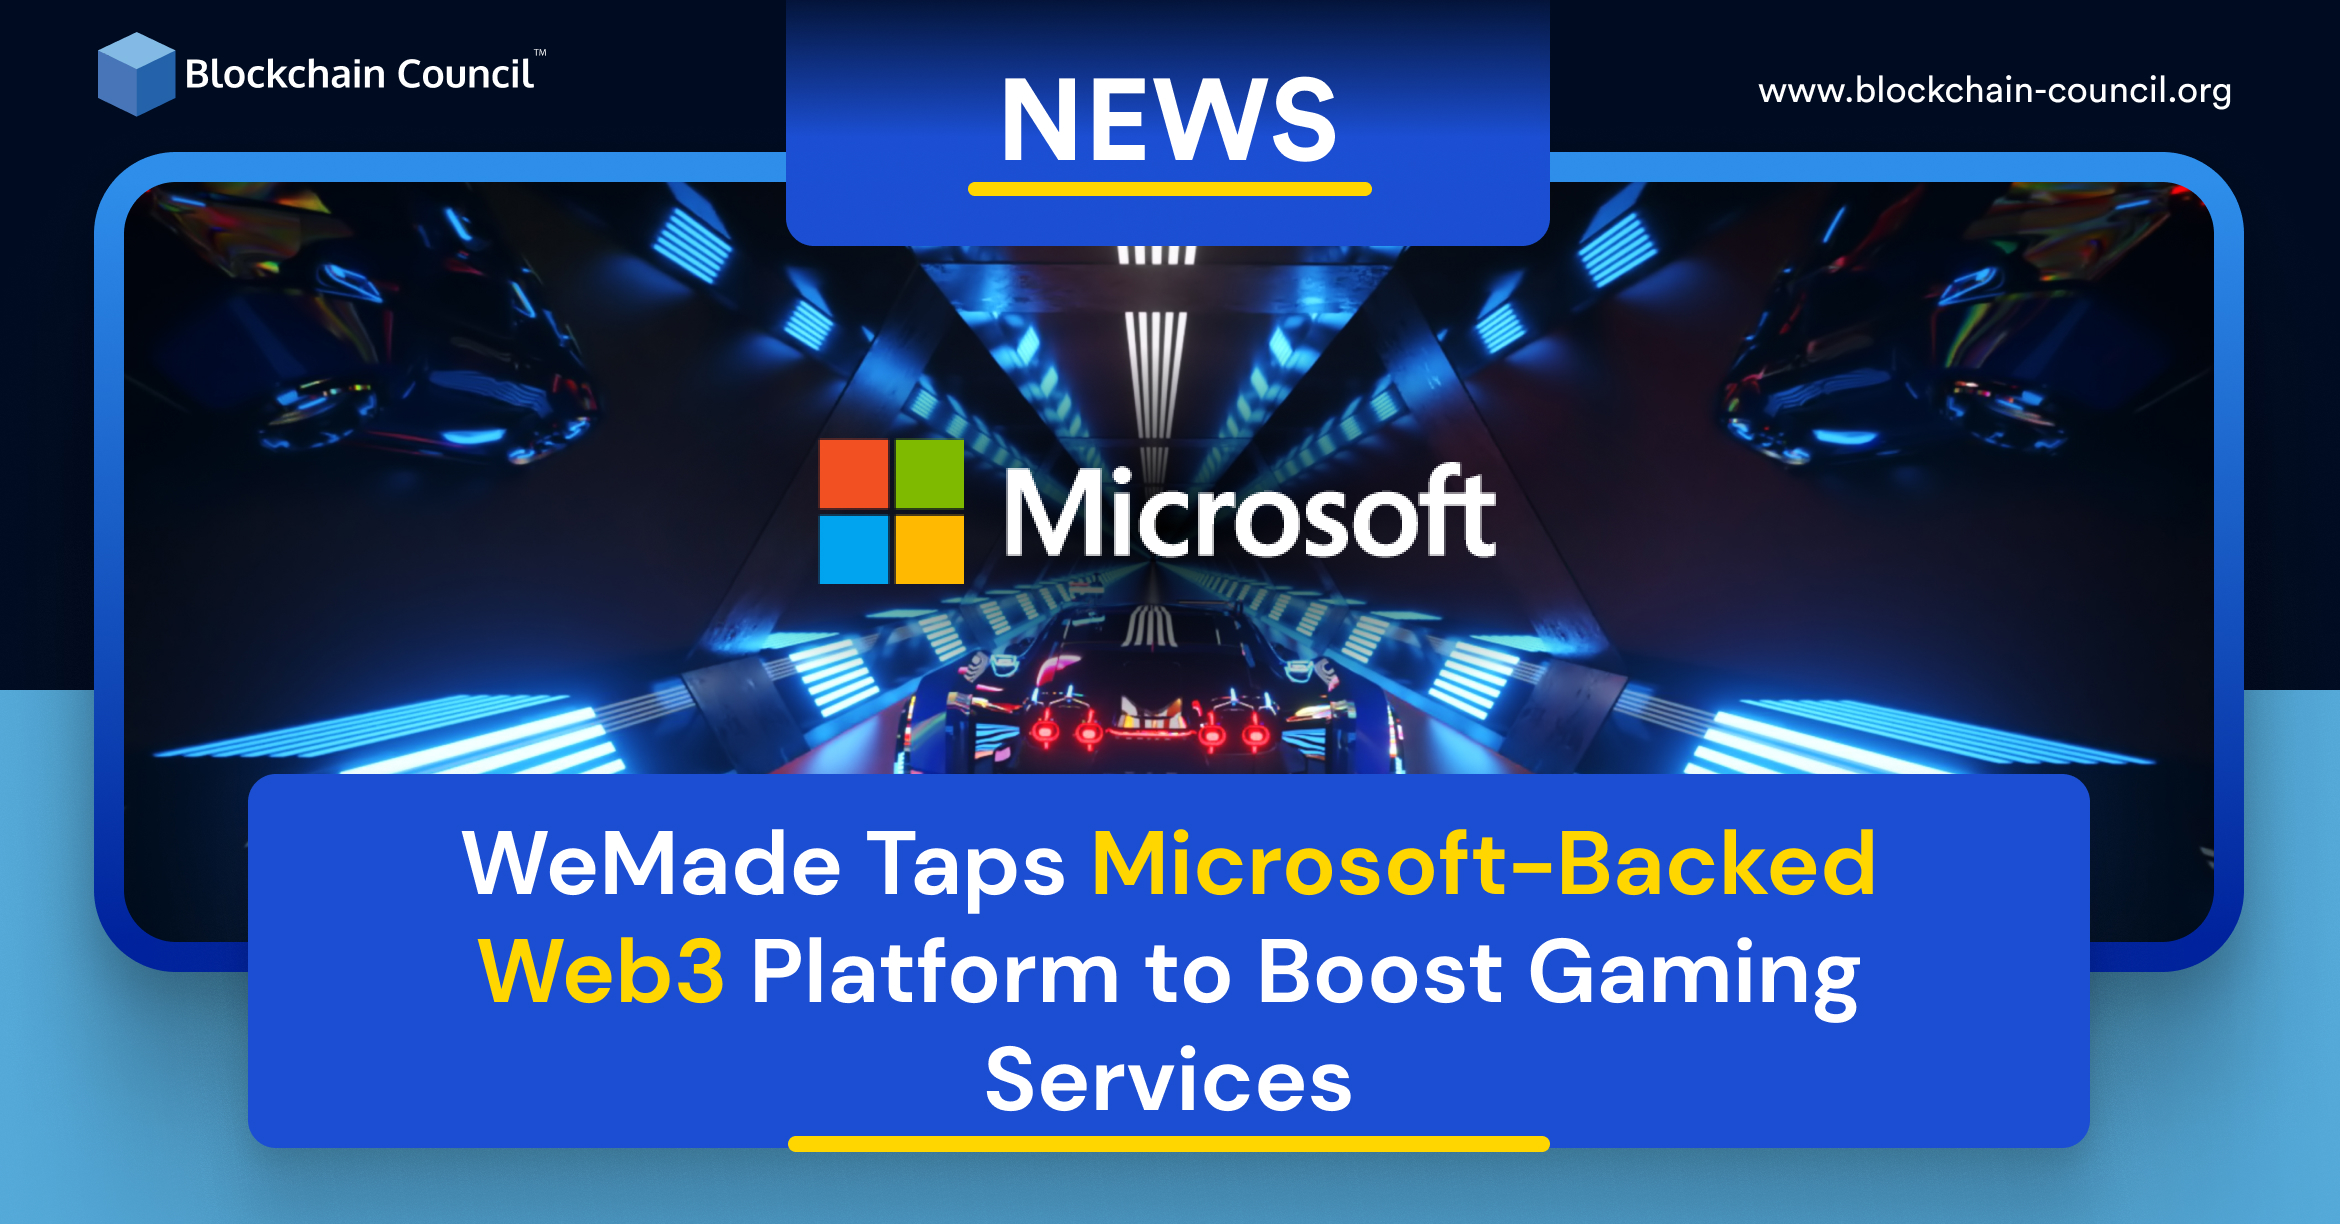 WeMade Taps Microsoft-Backed Web3 Platform to Boost Gaming Services